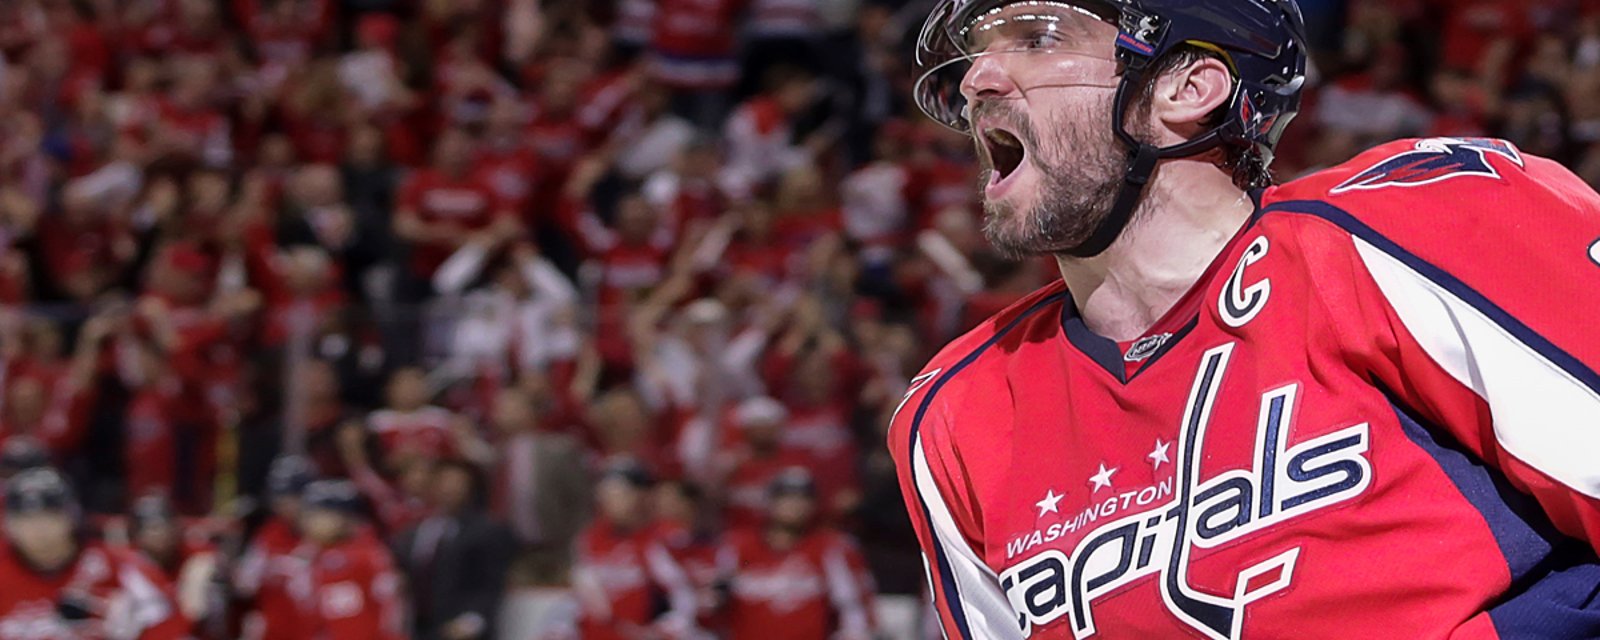 Breaking: Alexander Ovechkin makes history with insane performance!